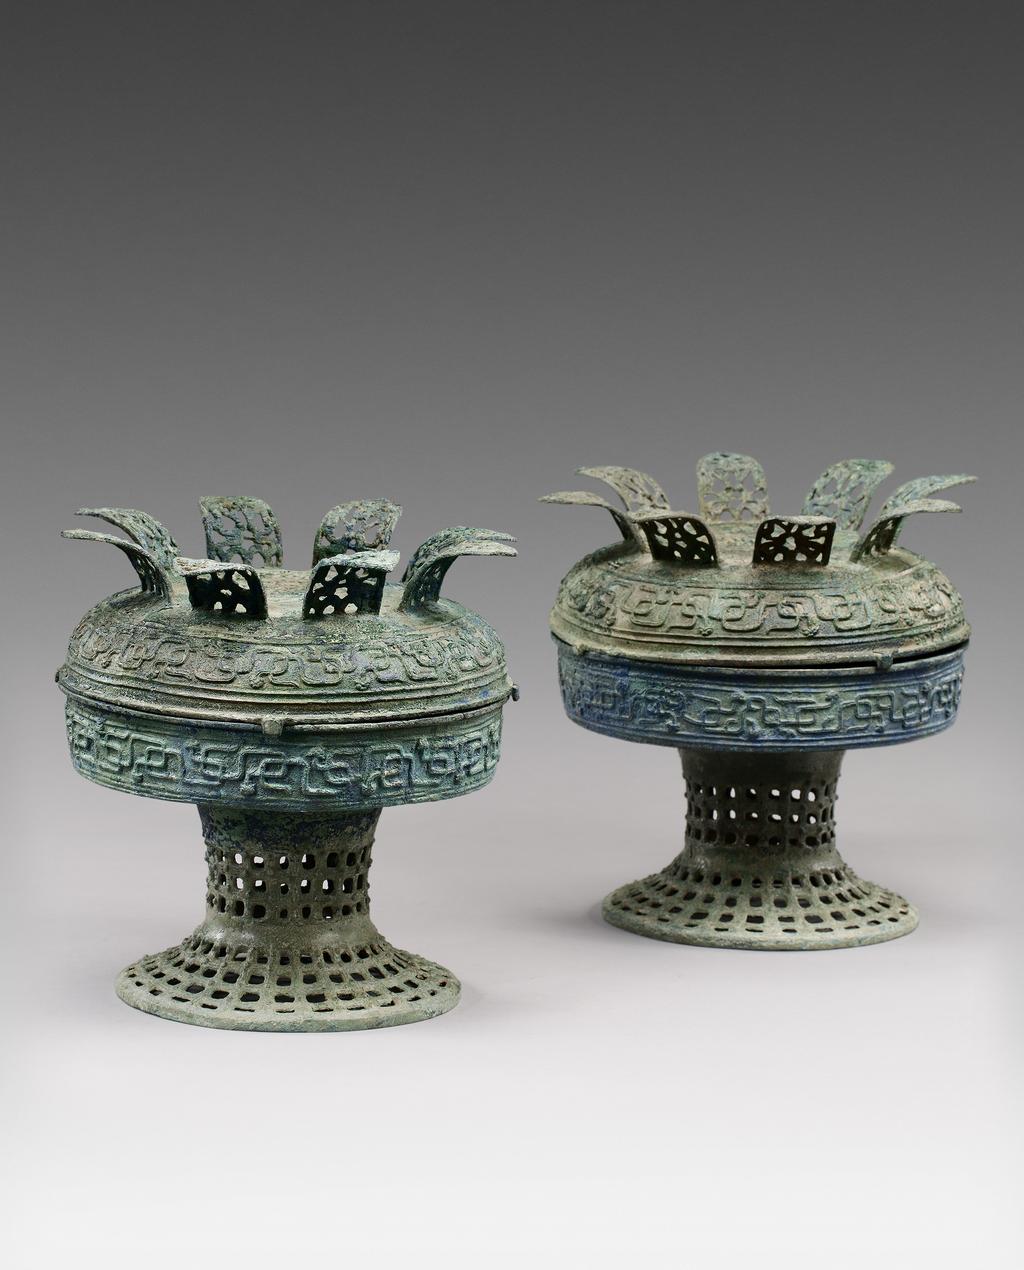 Pair of bronze food vessels with petalled cover, dou Early Spring and Autumn period (c.